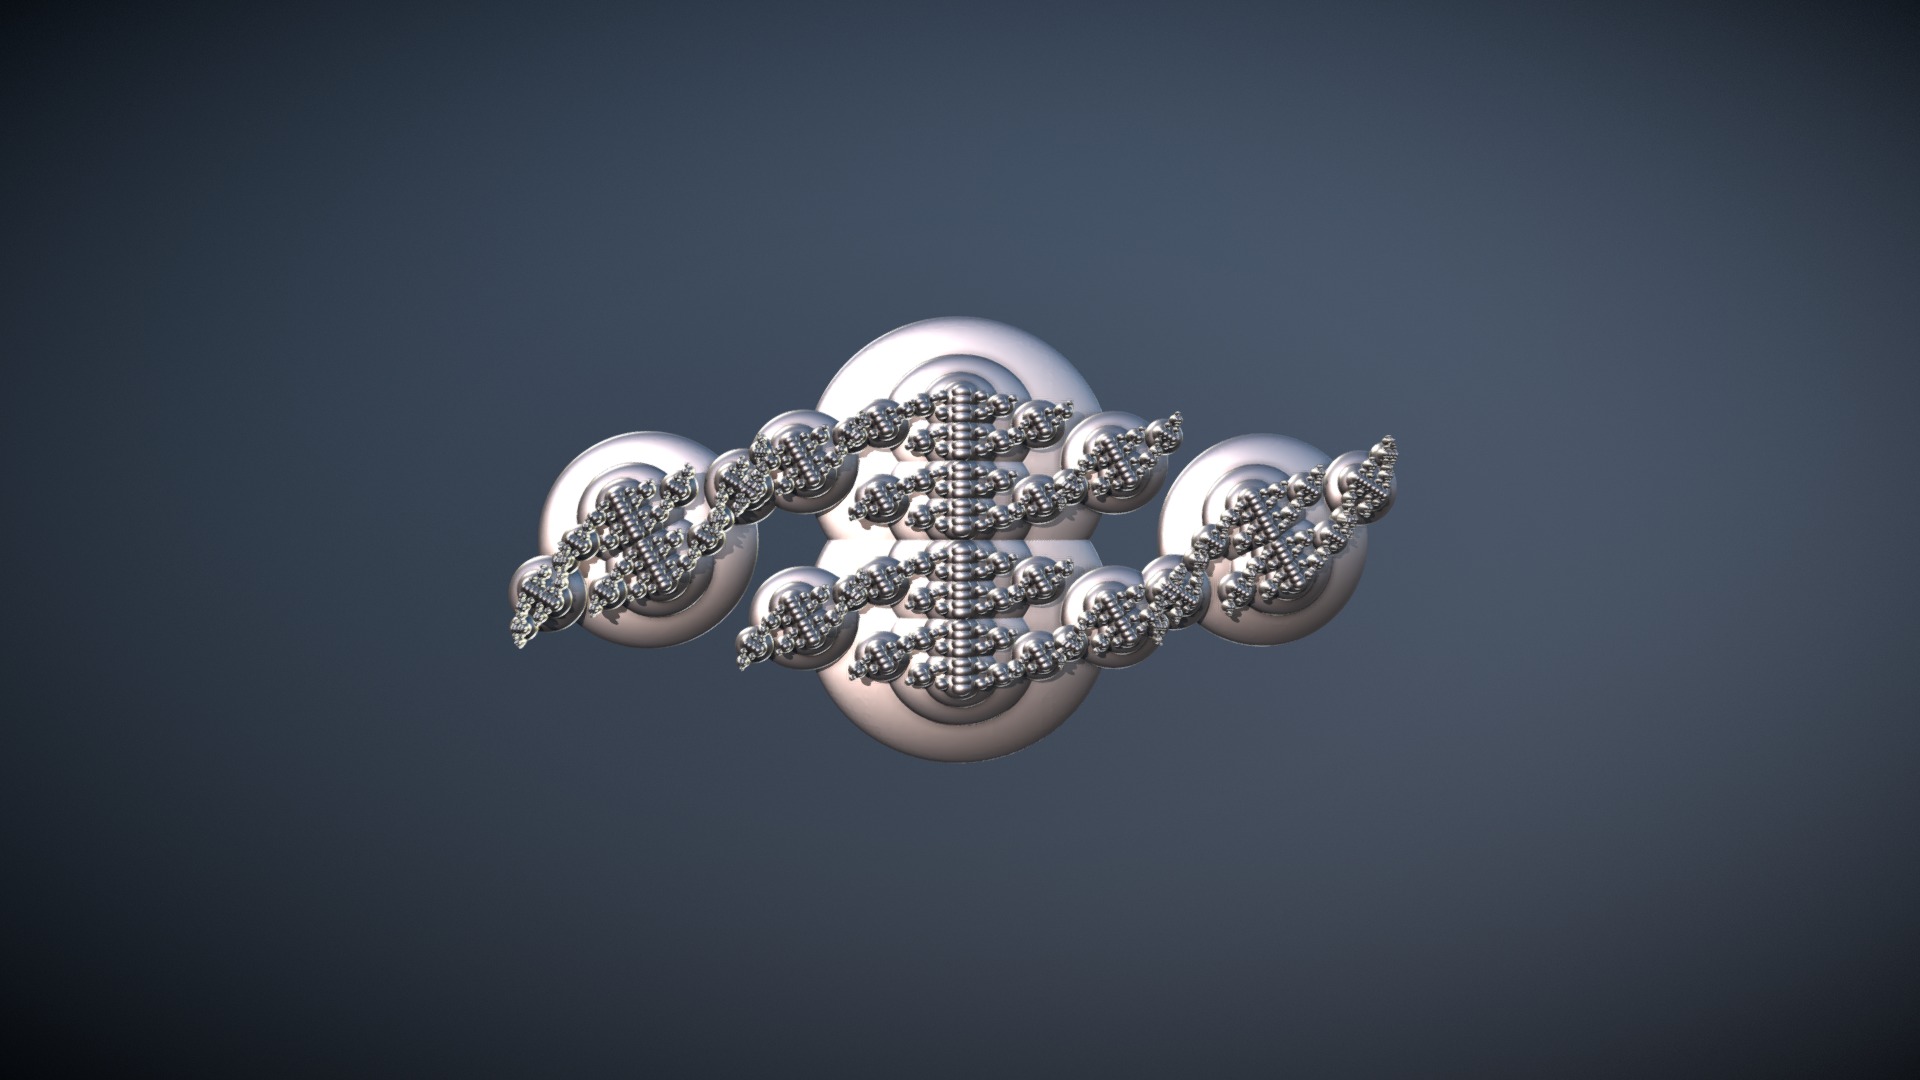 3D model Propagation - This is a 3D model of the Propagation. The 3D model is about a silver and gold ring.